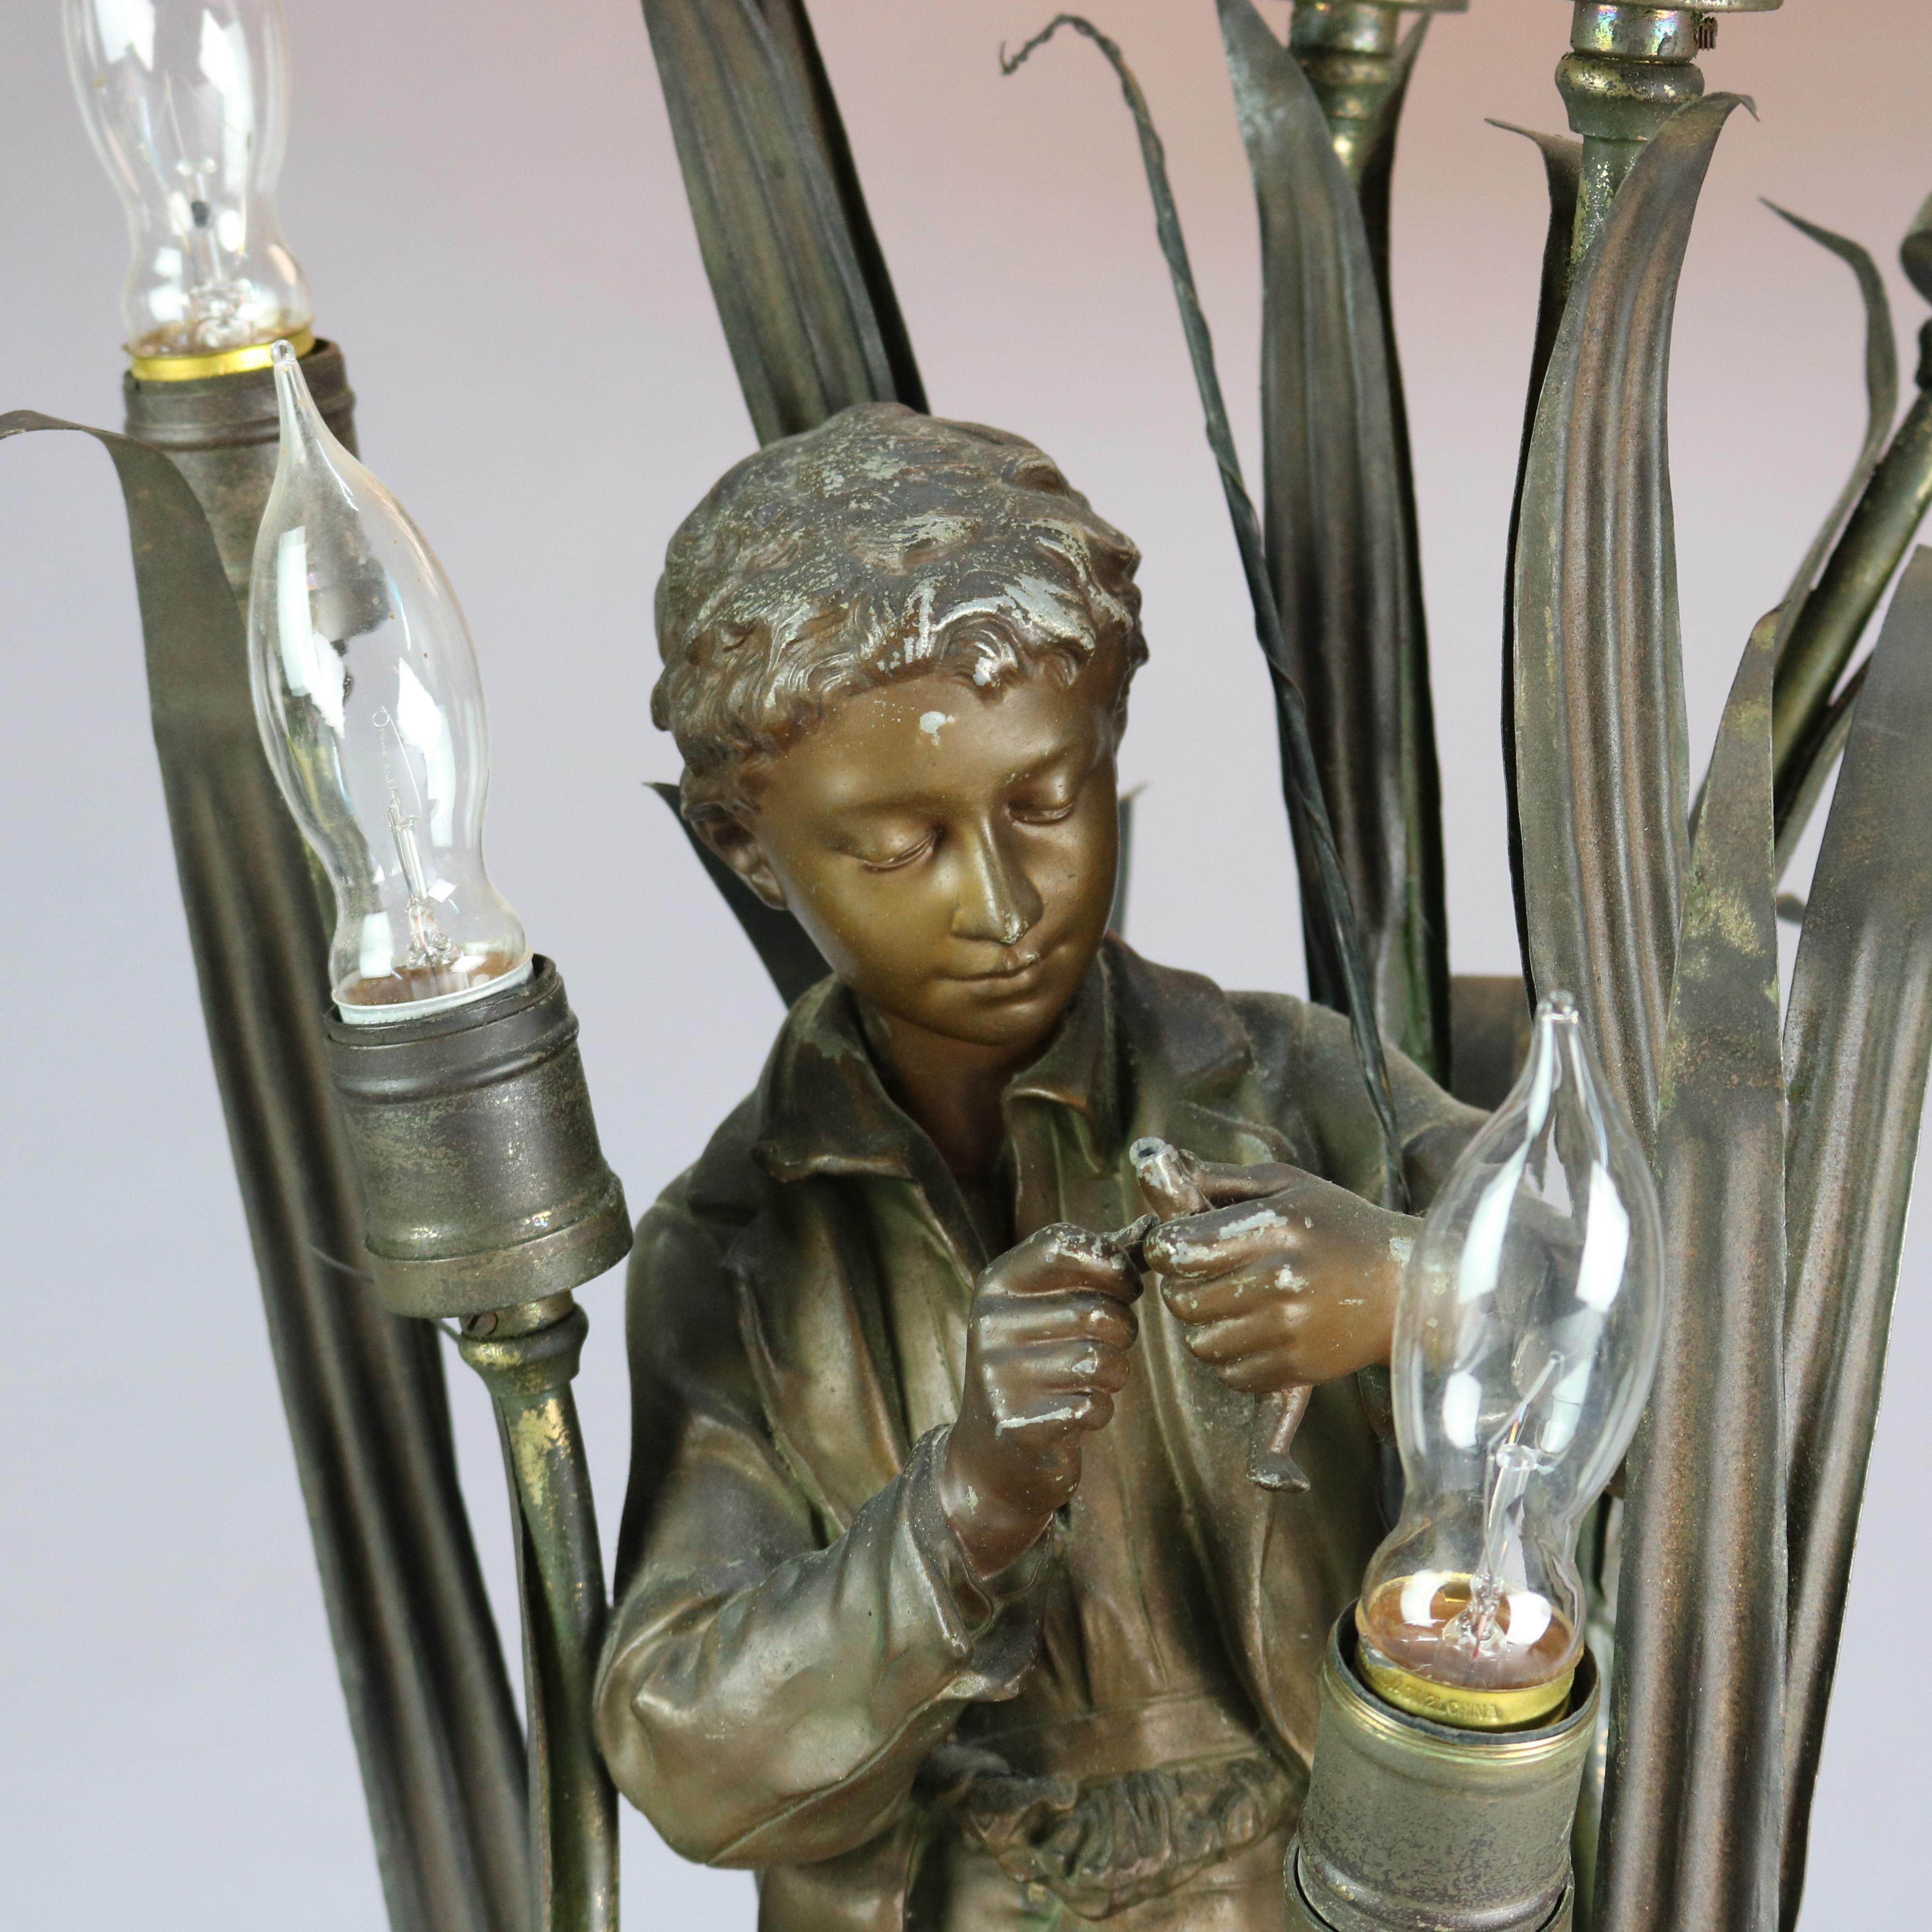 An antique figural six-light newell post lamp offers bronzed cast metal sculpture titled Le Pecheur depicting a boy fishing among reeds or cattails, c1890

Measures: 28